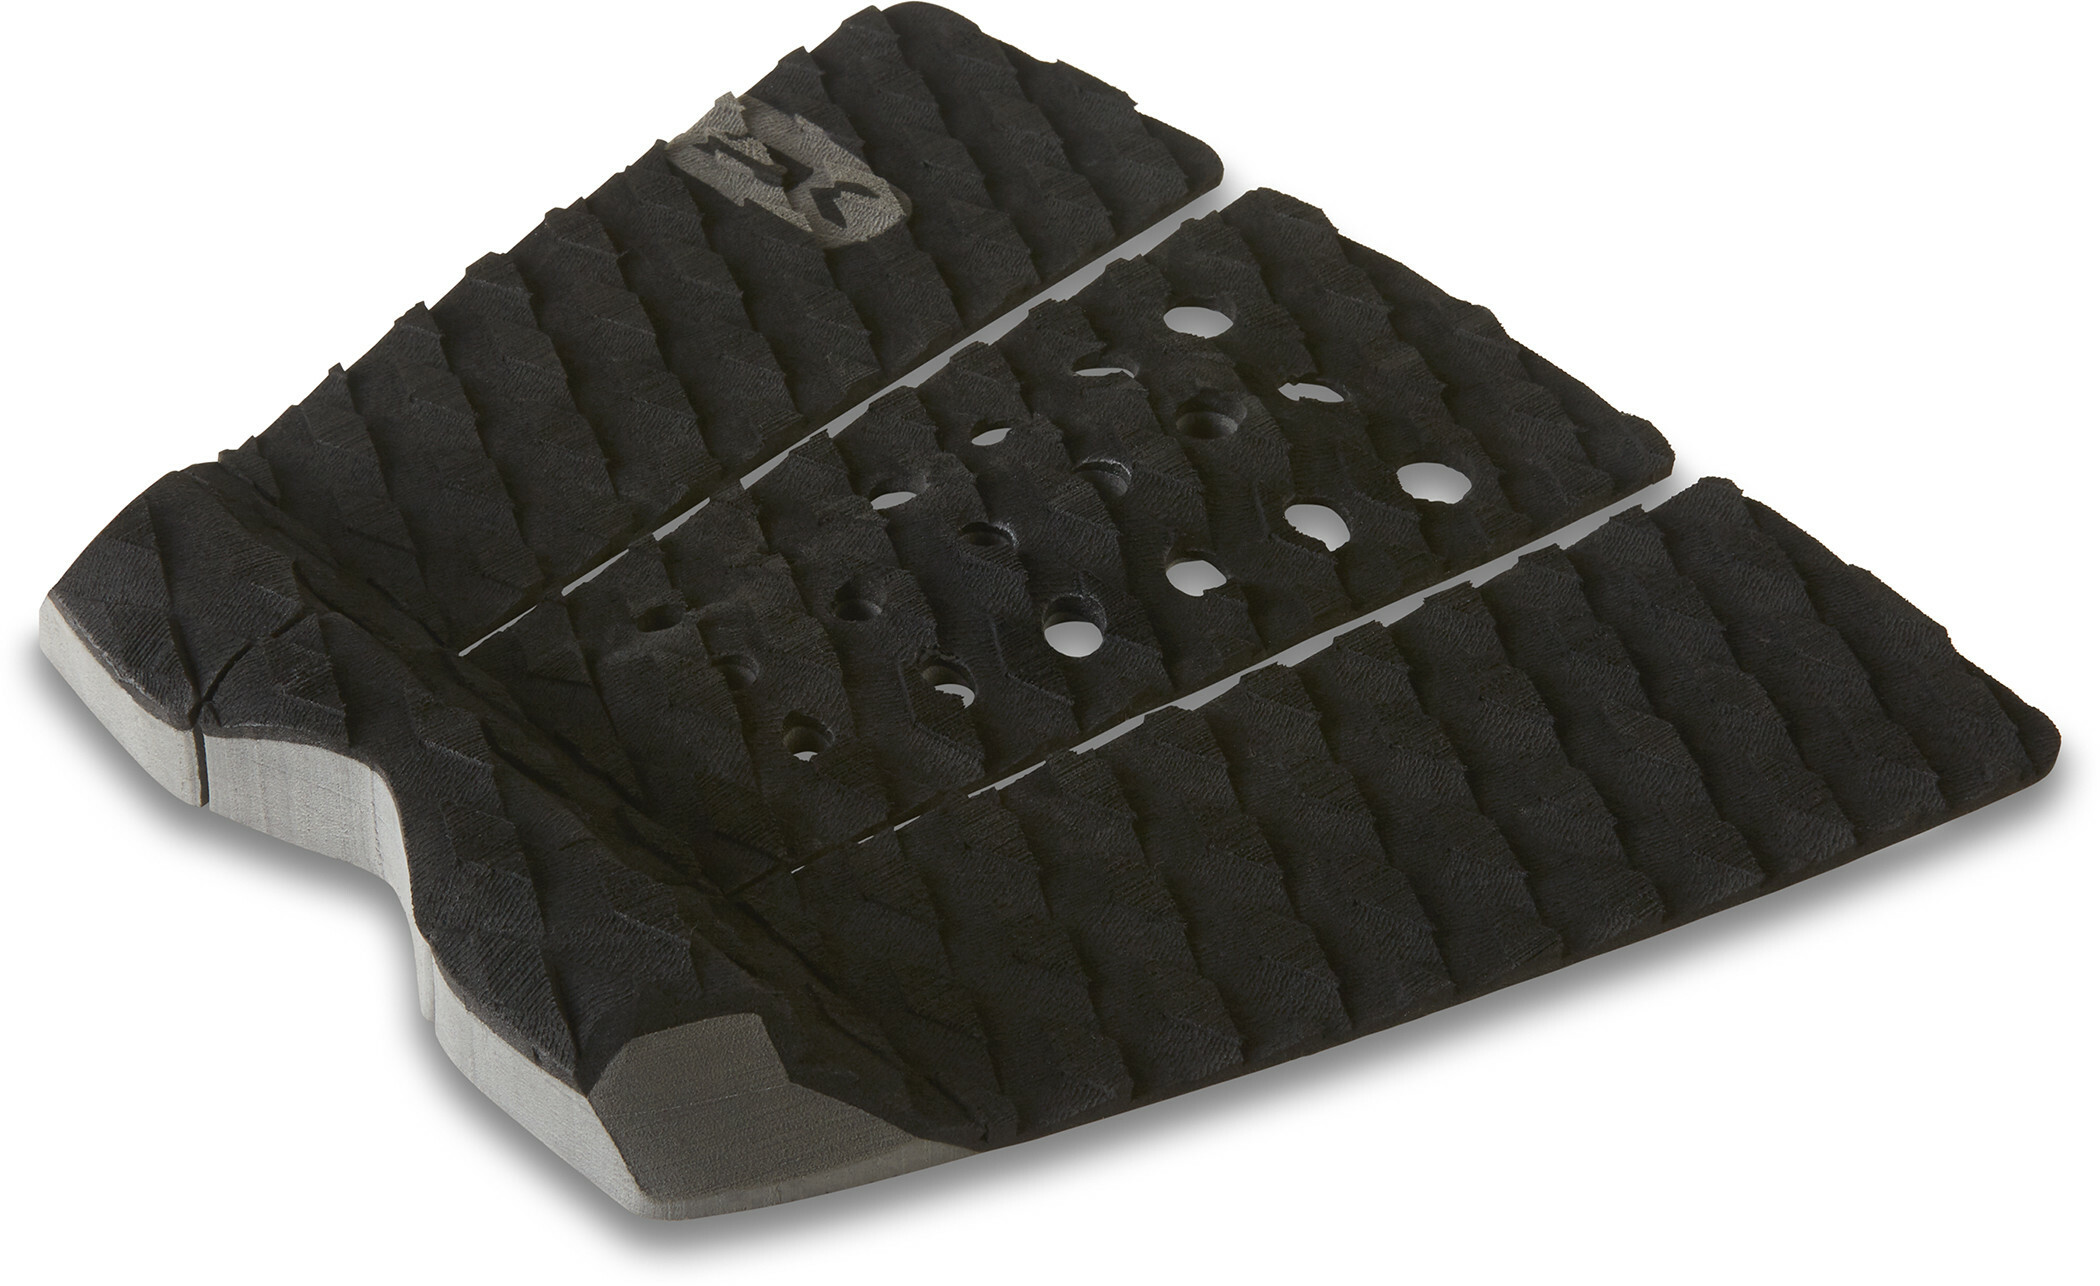 ALBEE LAYER PRO SURF TRACTION PAD